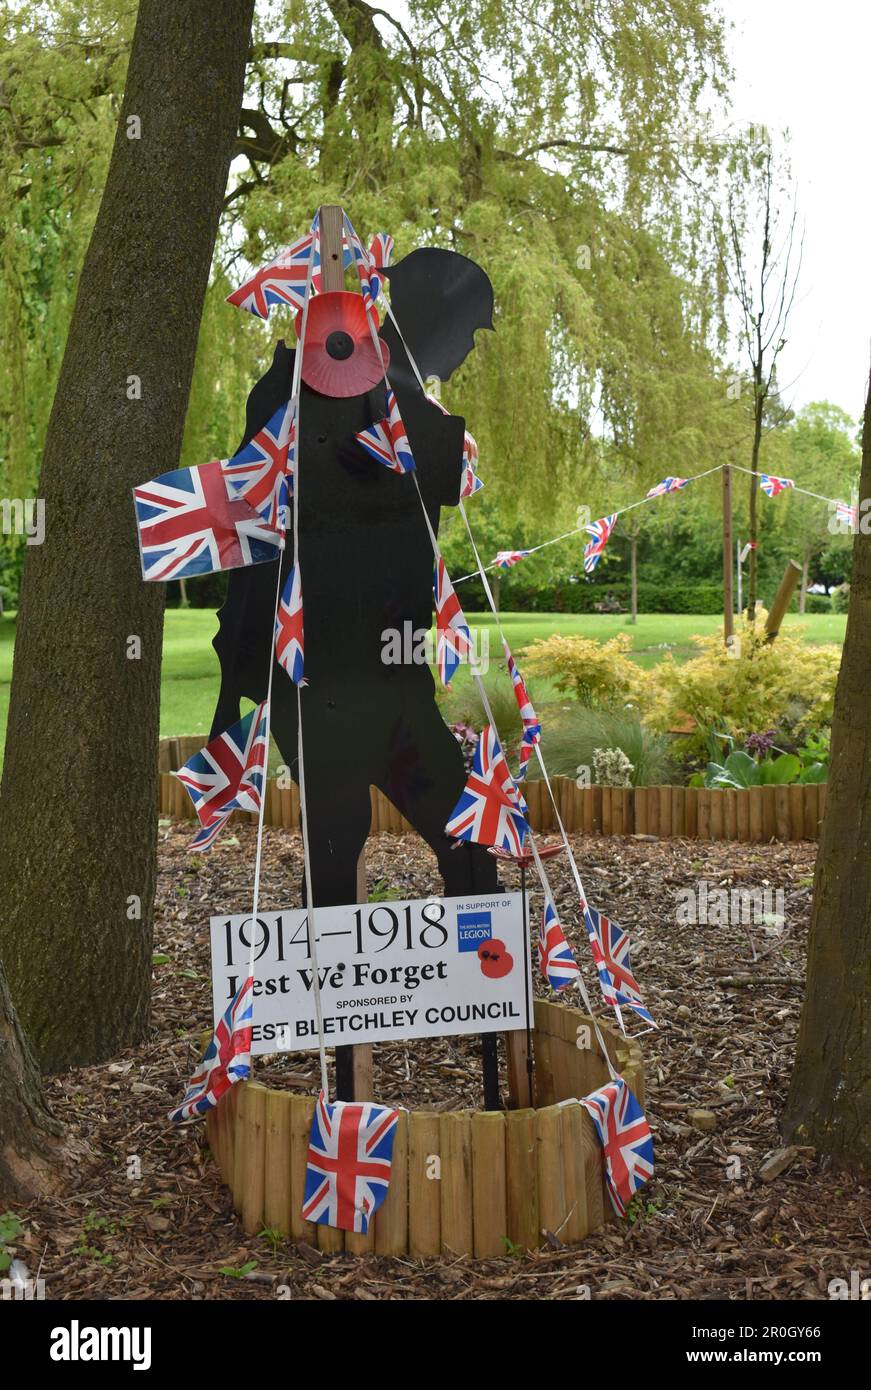 A 'Lest We Forget' figure decorated with bunting for the Coronation of King Charles III. Stock Photo